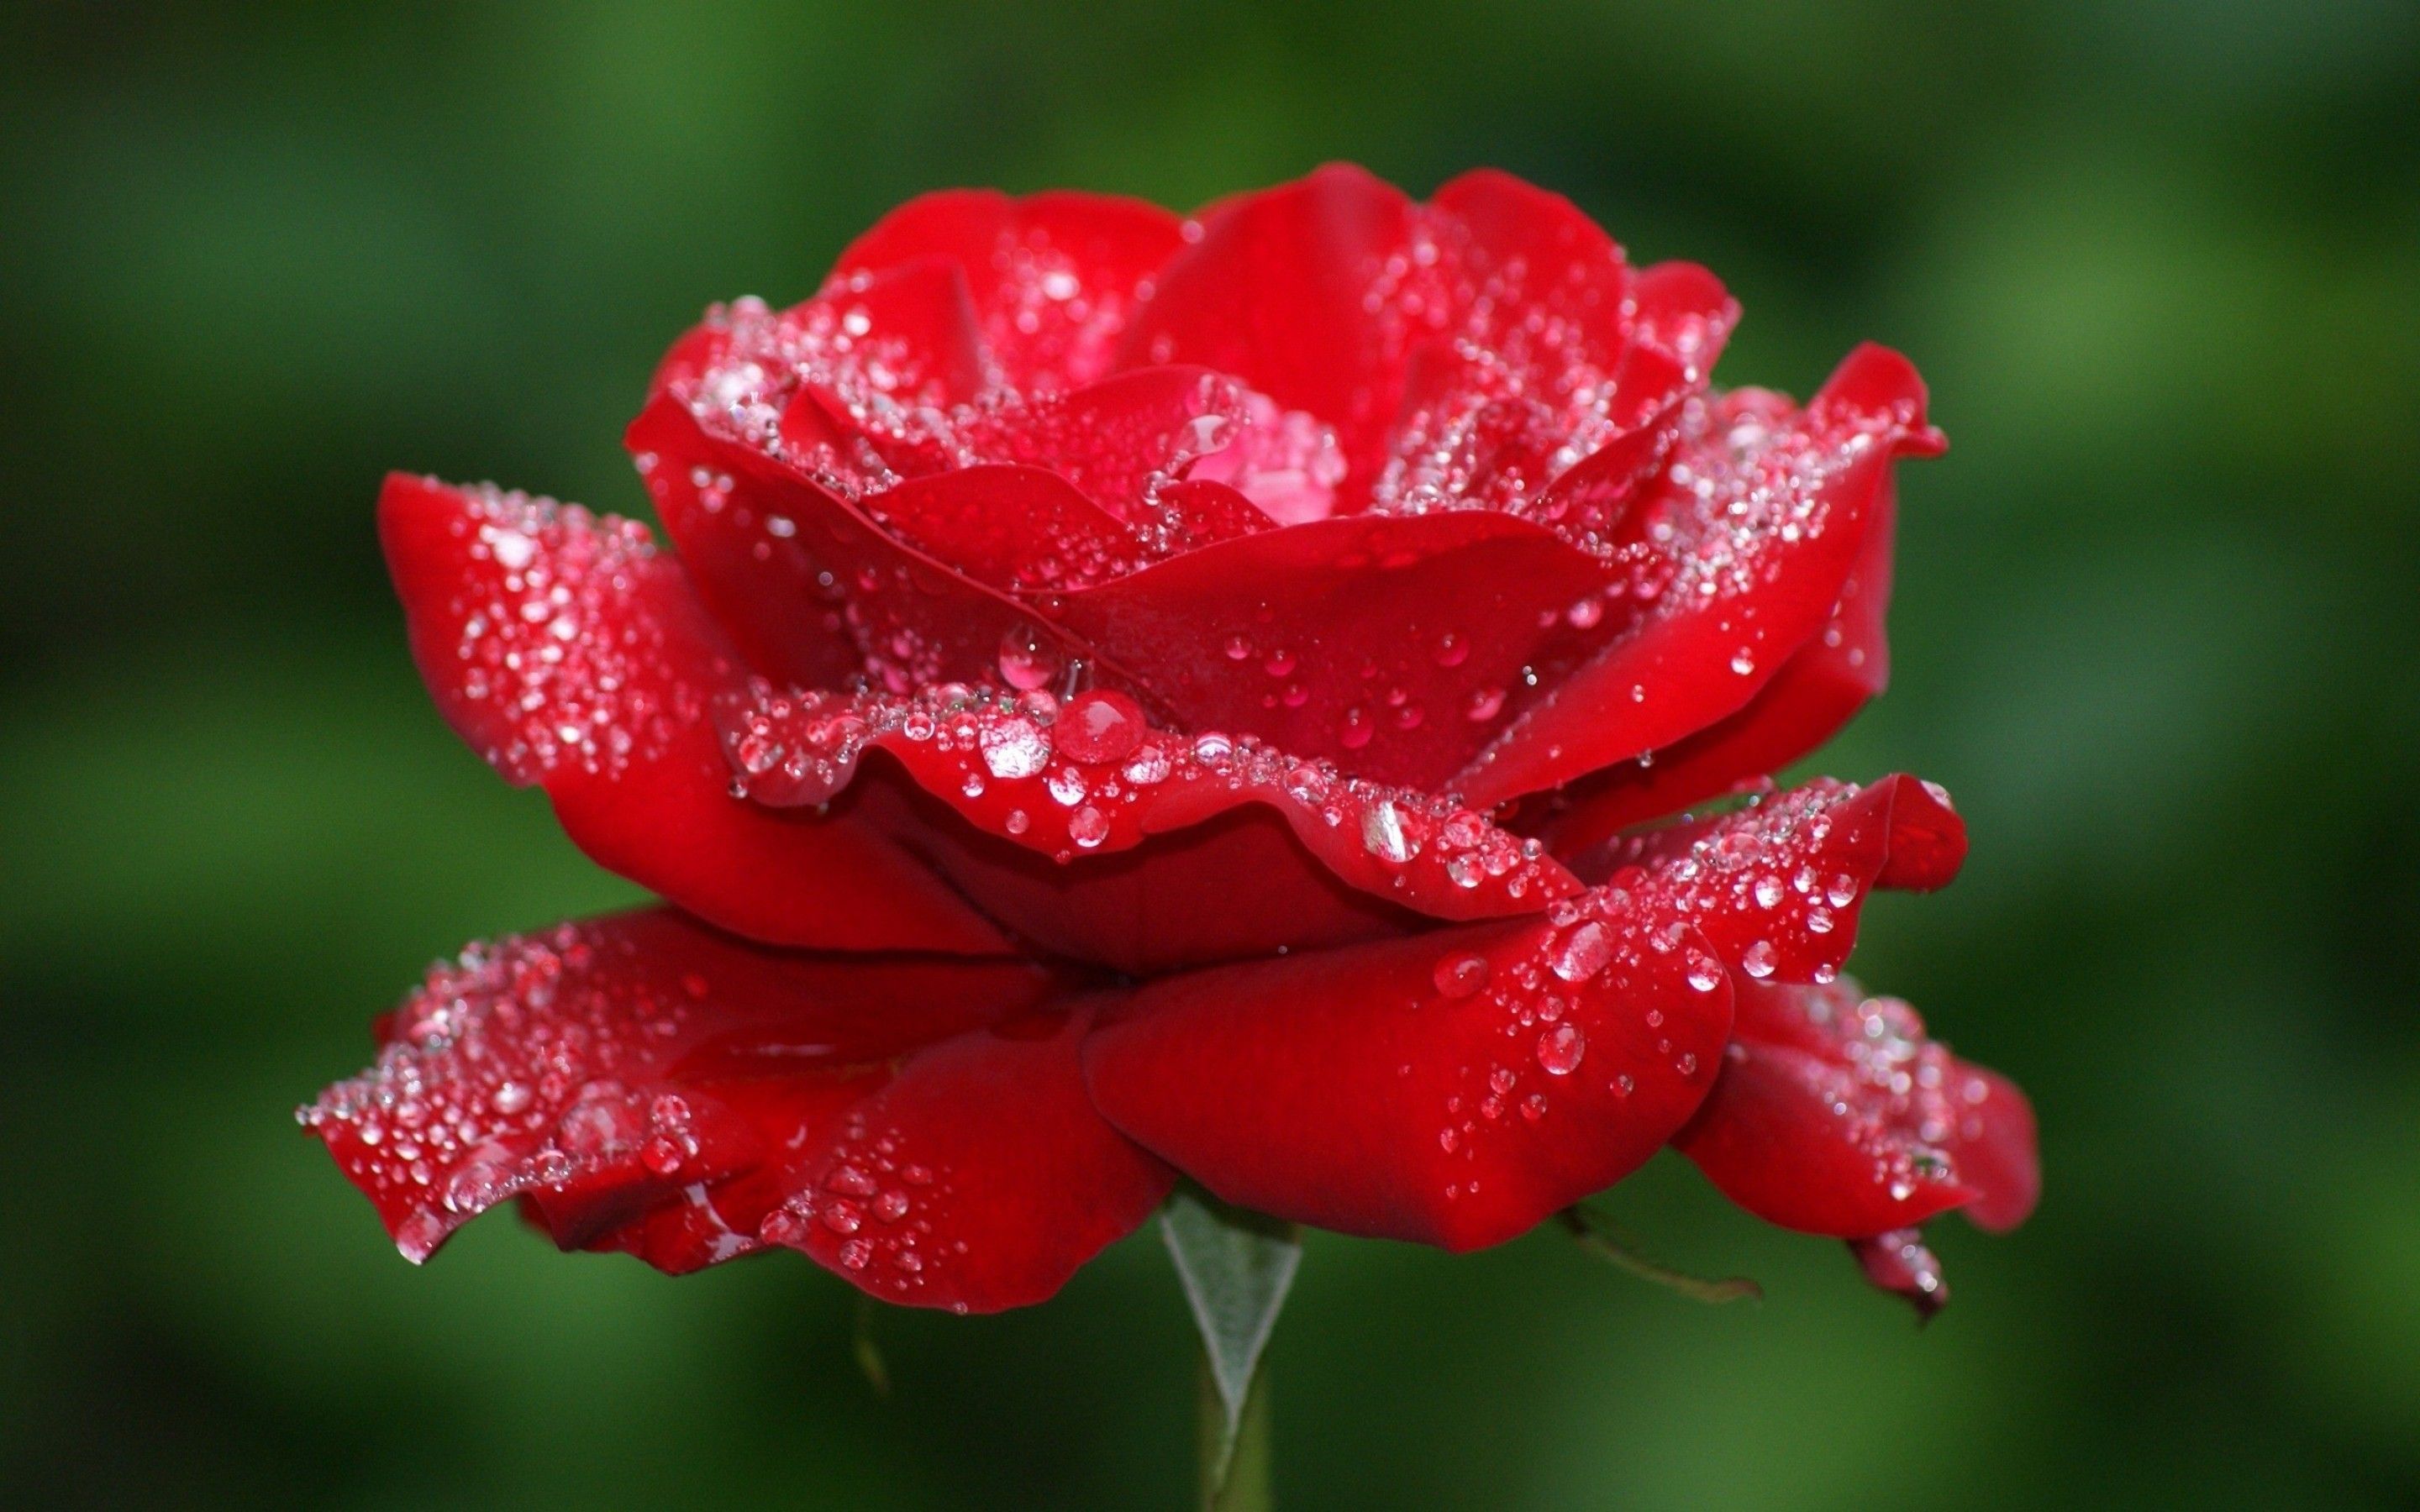 amazing rose flower beautiful hd images picture photos download